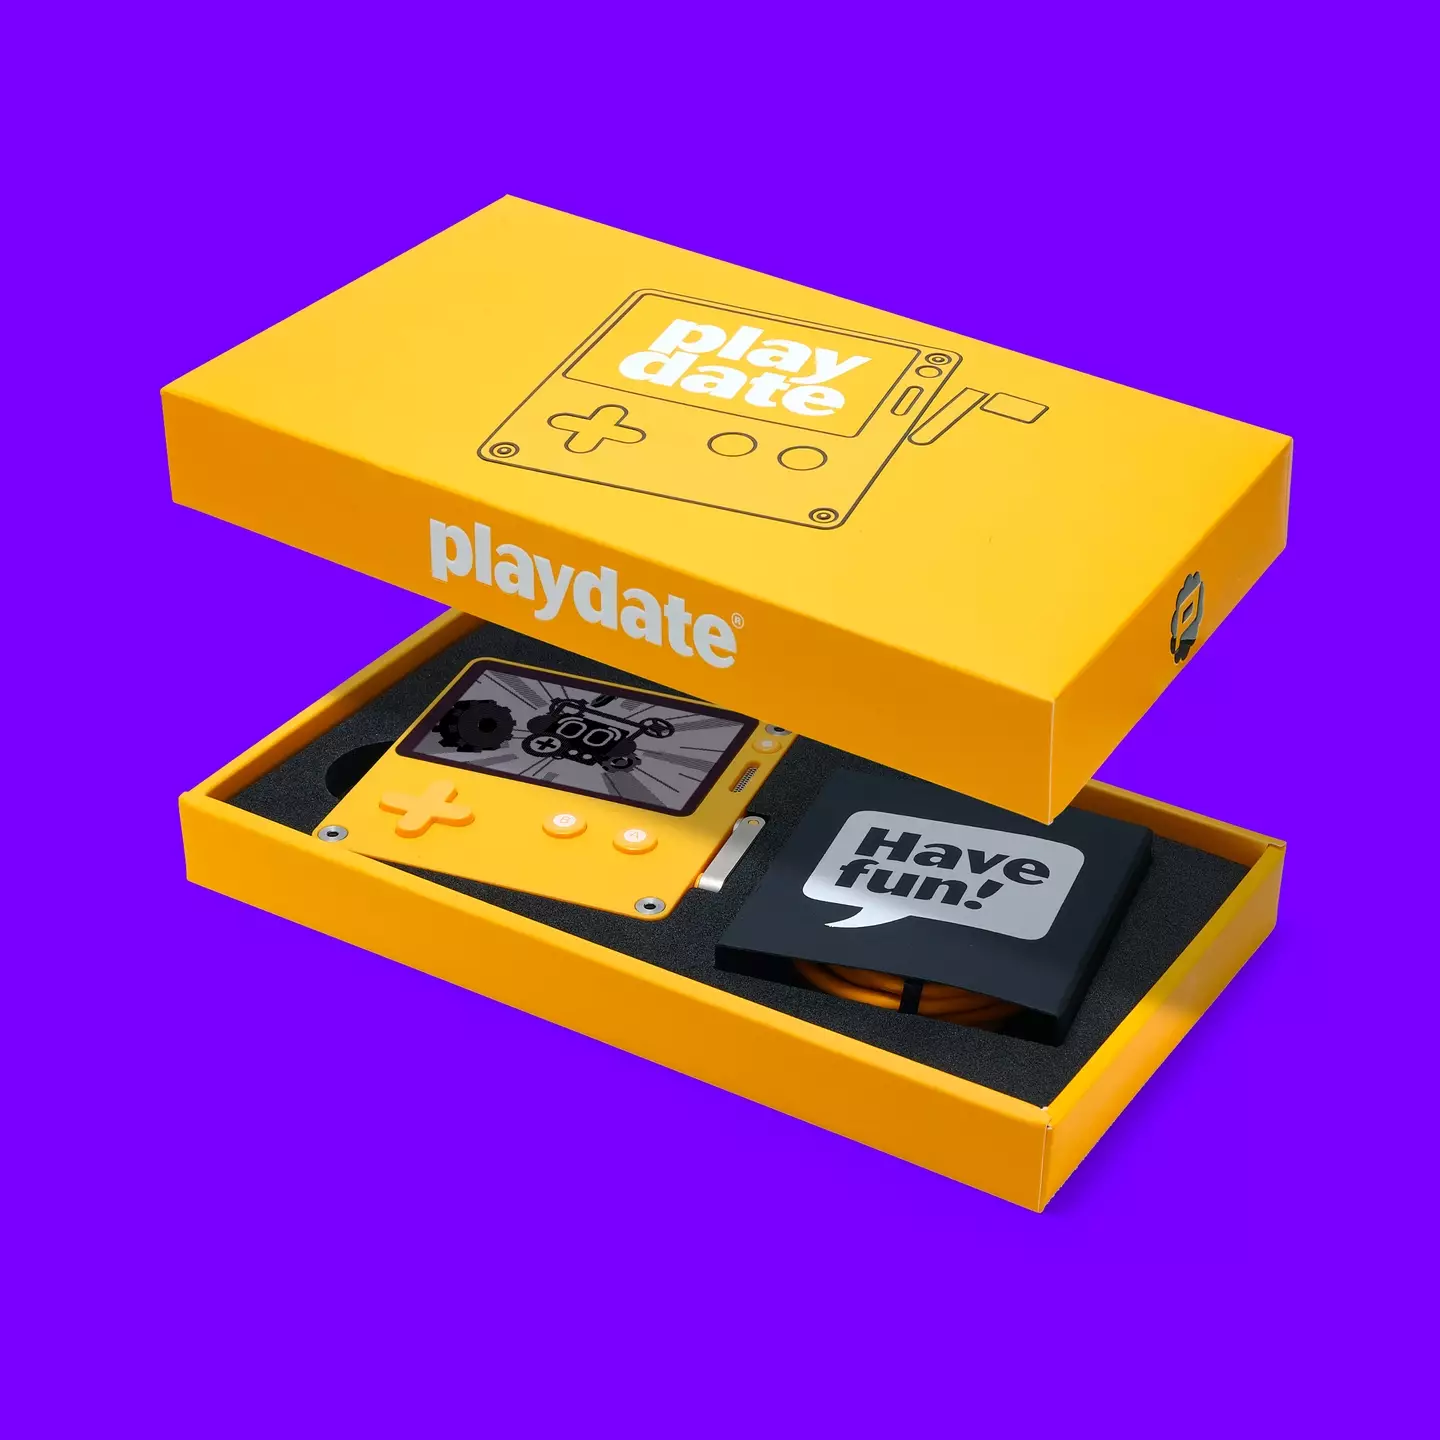 The Playdate packaging is simple but delightful /